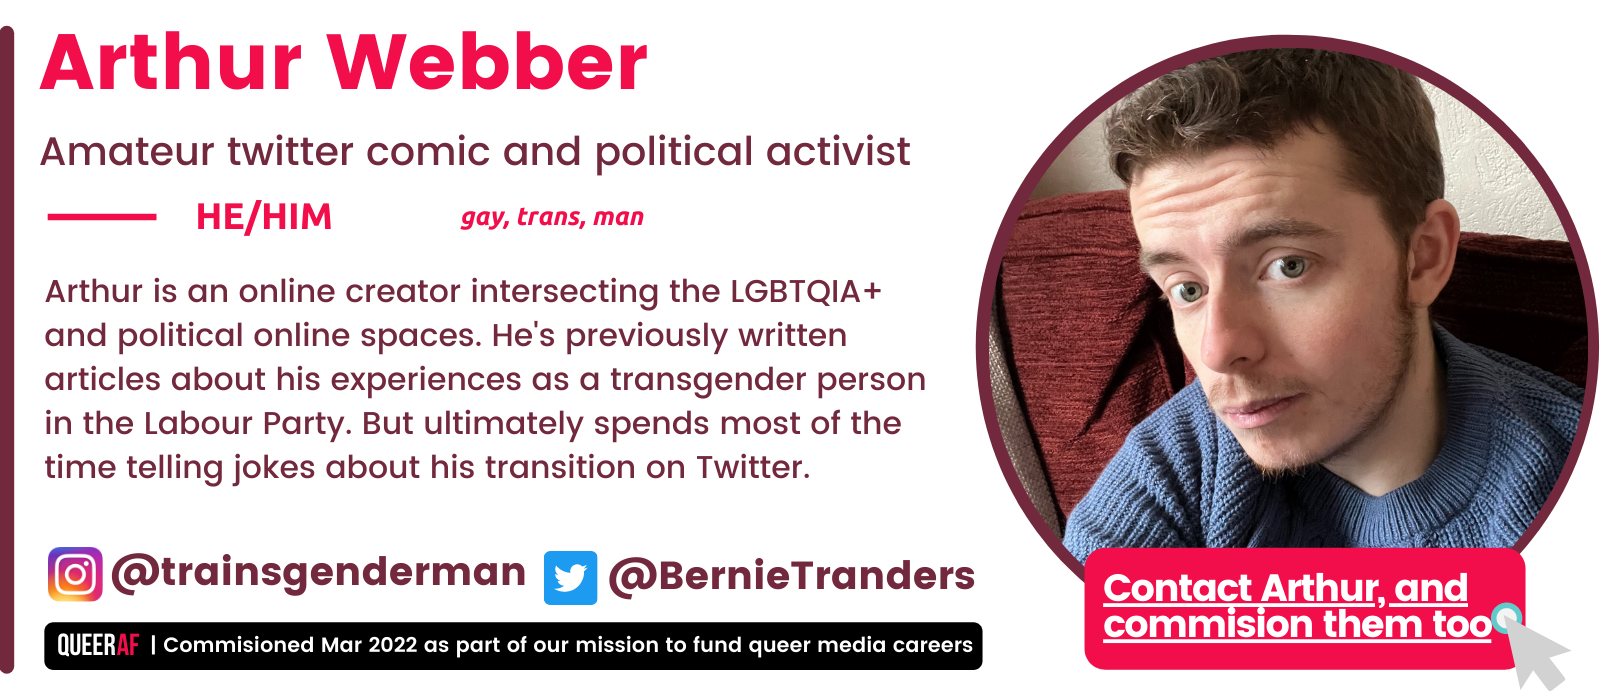 Arthur is an online creator intersecting the LGBTQIA+ and political online spaces. He's previously written articles about his experiences as a transgender person in the Labour Party. But ultimately spends most of the time telling jokes about his transition on Twitter. HE/Him gay, trans, man  Arthur Webber Amateur twitter comic and political activist